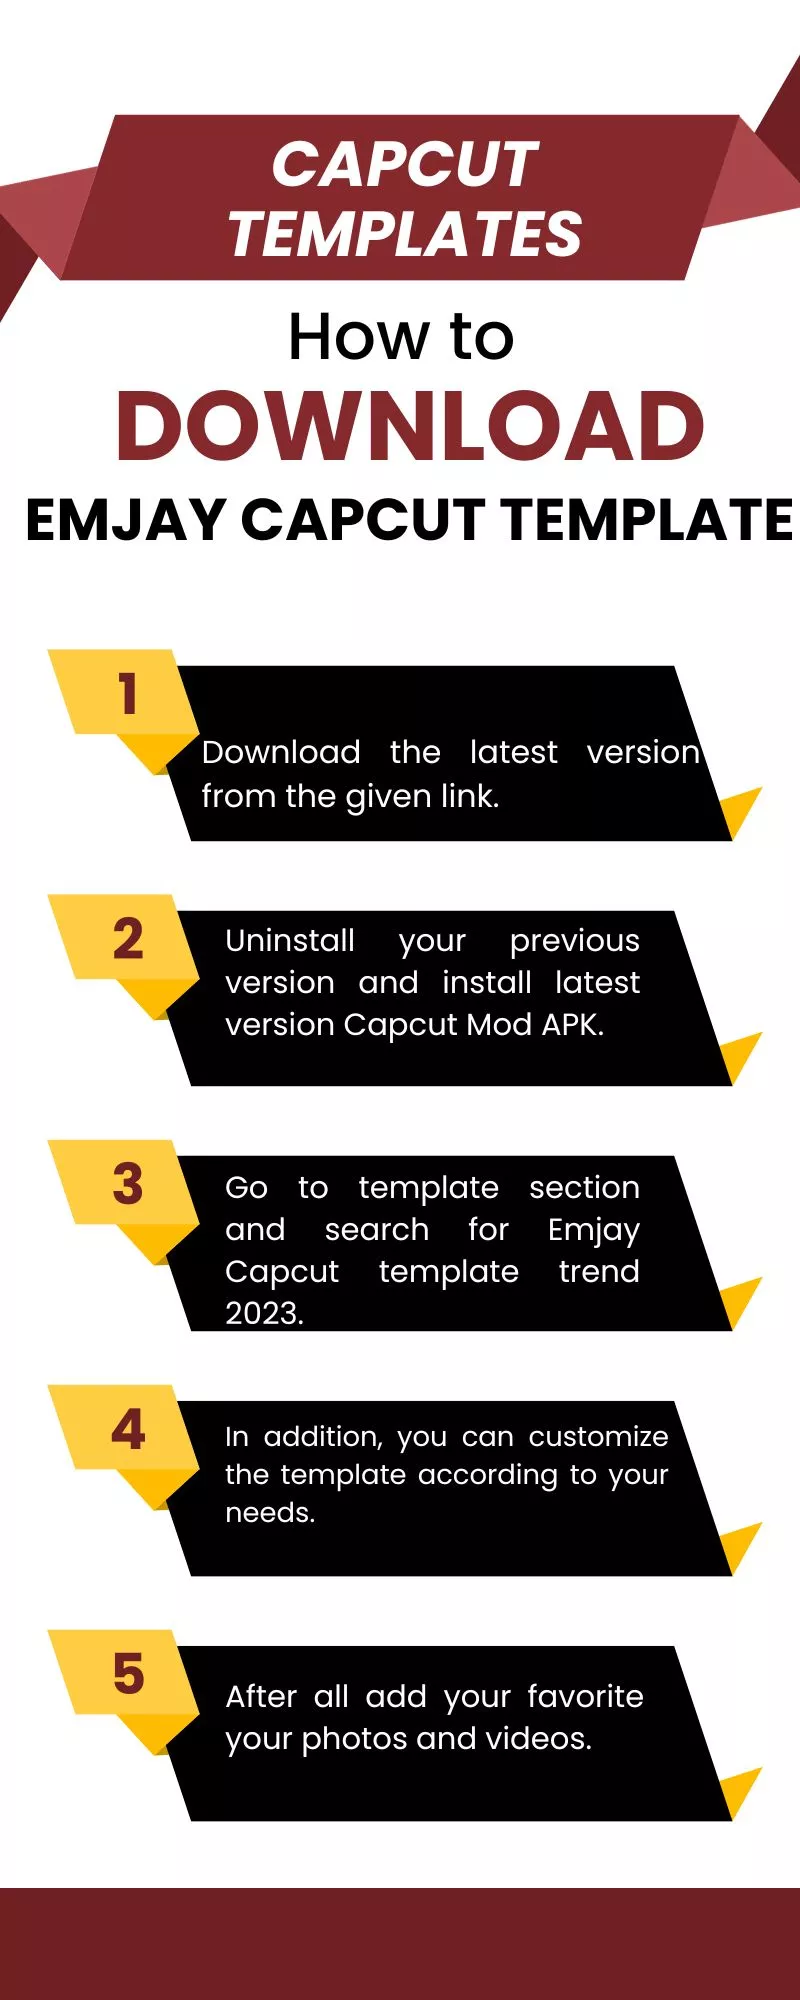 How to Download Emjay Template 2023?